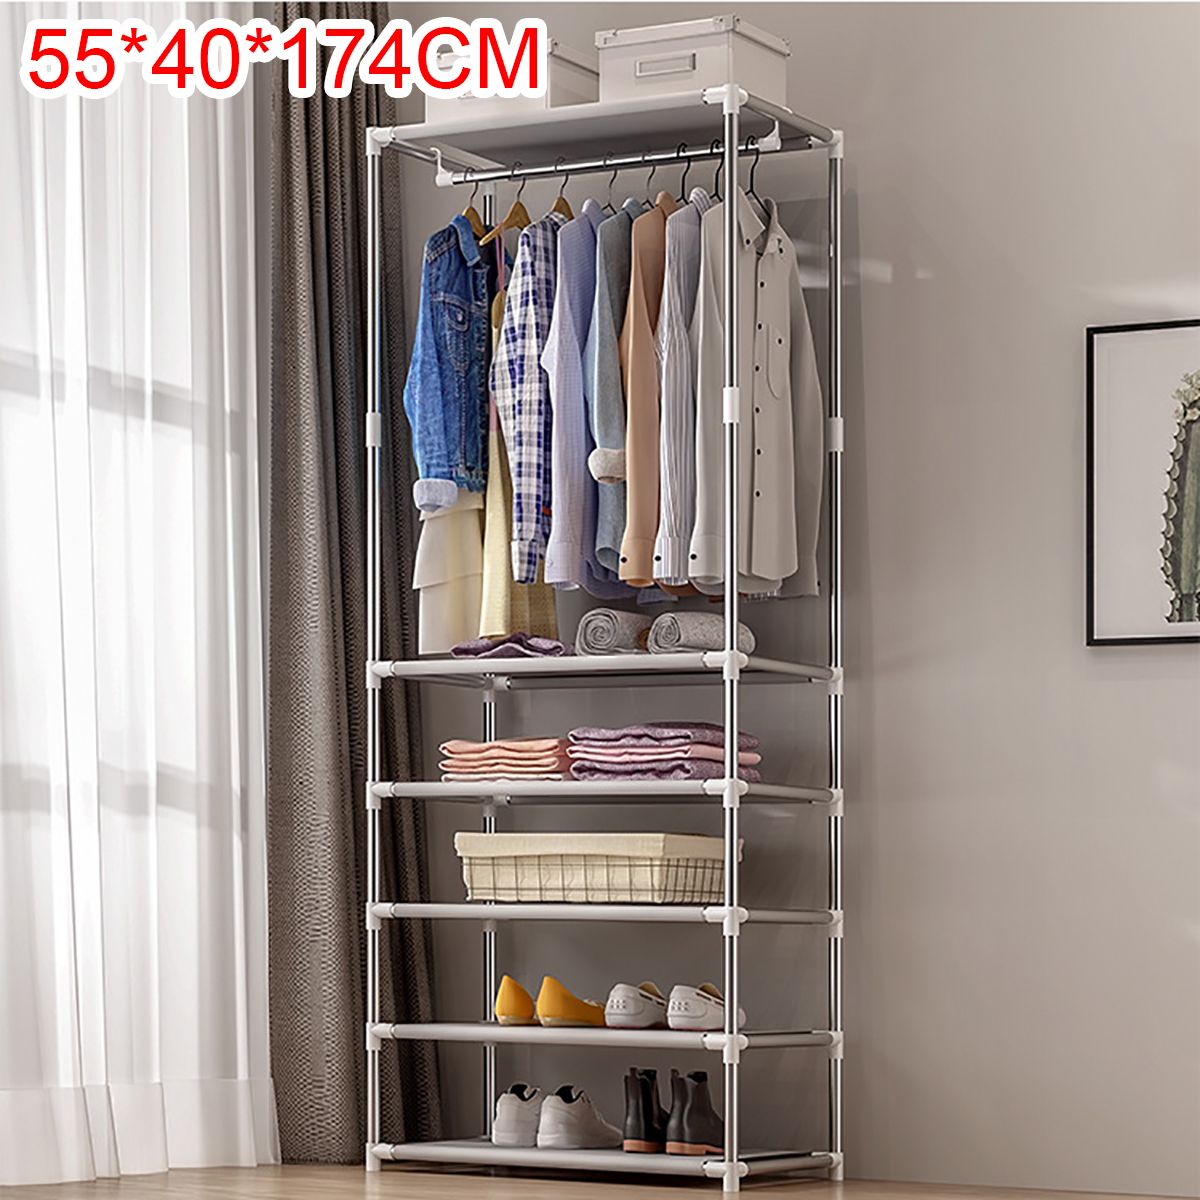 Simple Coat Rack Floor Clothes Hangers Creative Clothing Rack Shelf Easy Assembly Bedroom Hanging Clothing Racks Fashion Home Decorations 8